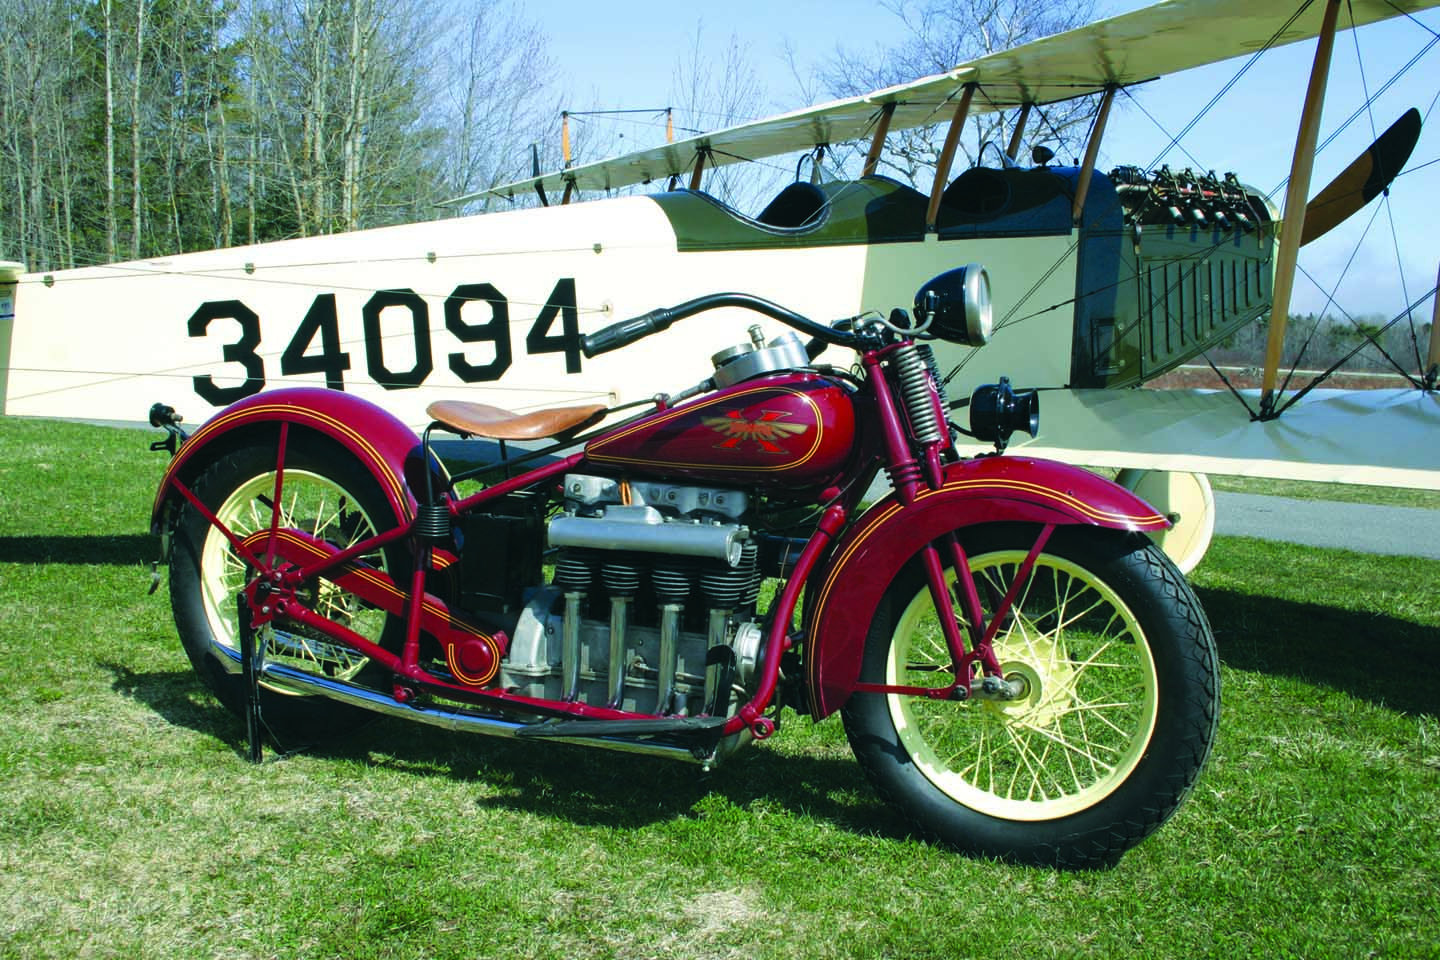 owls head maine antique and vintage motorcycles take center stage at 